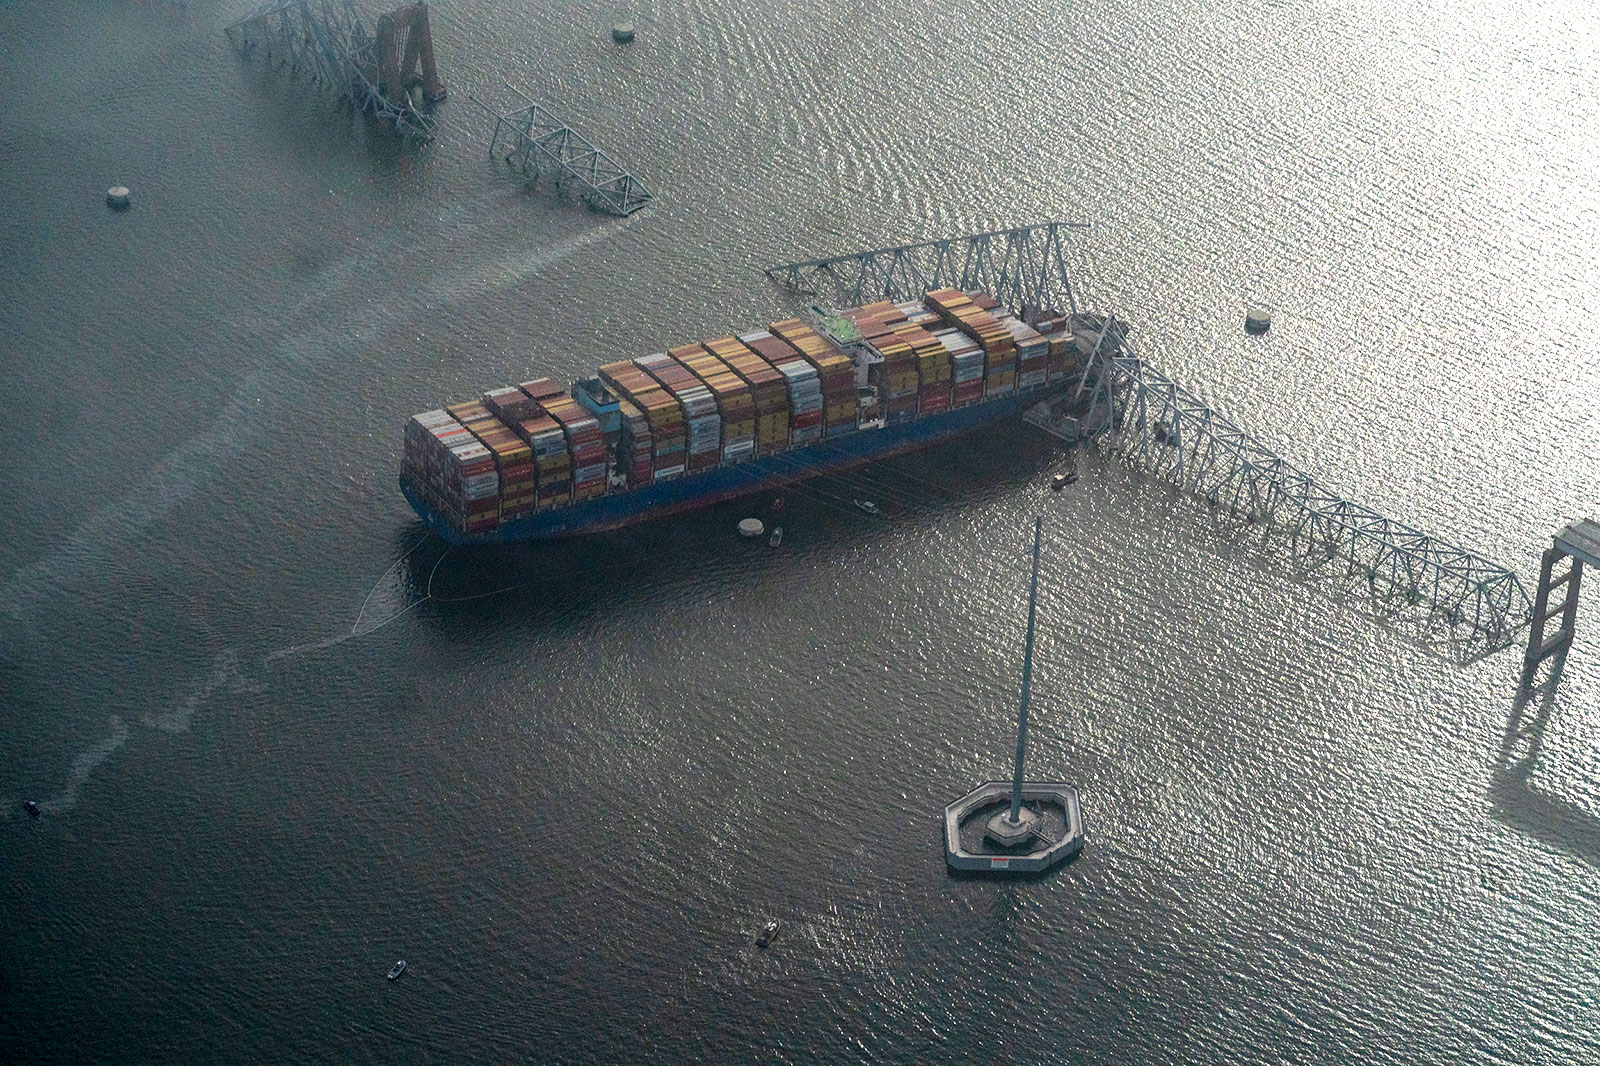 The Dali cargo ship is seen after crashing into the Francis Scott Key Bridge in Baltimore on March 26.